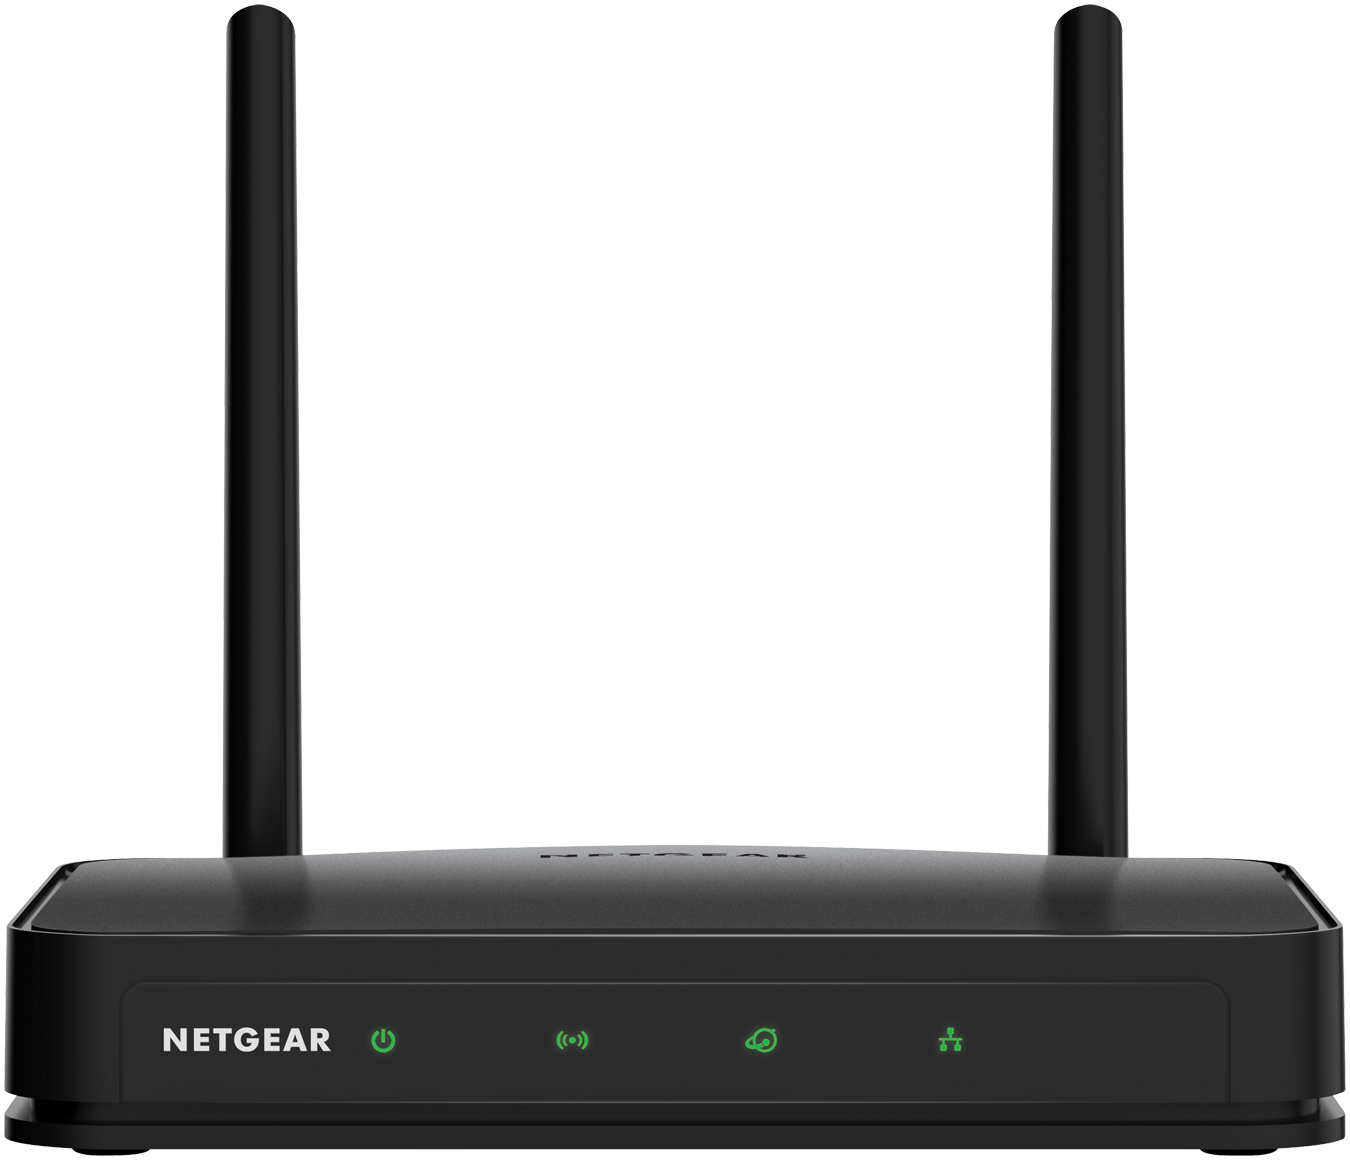 NETGEAR - AC750 WiFi Router, 750Mbps (R6020) - image 4 of 7